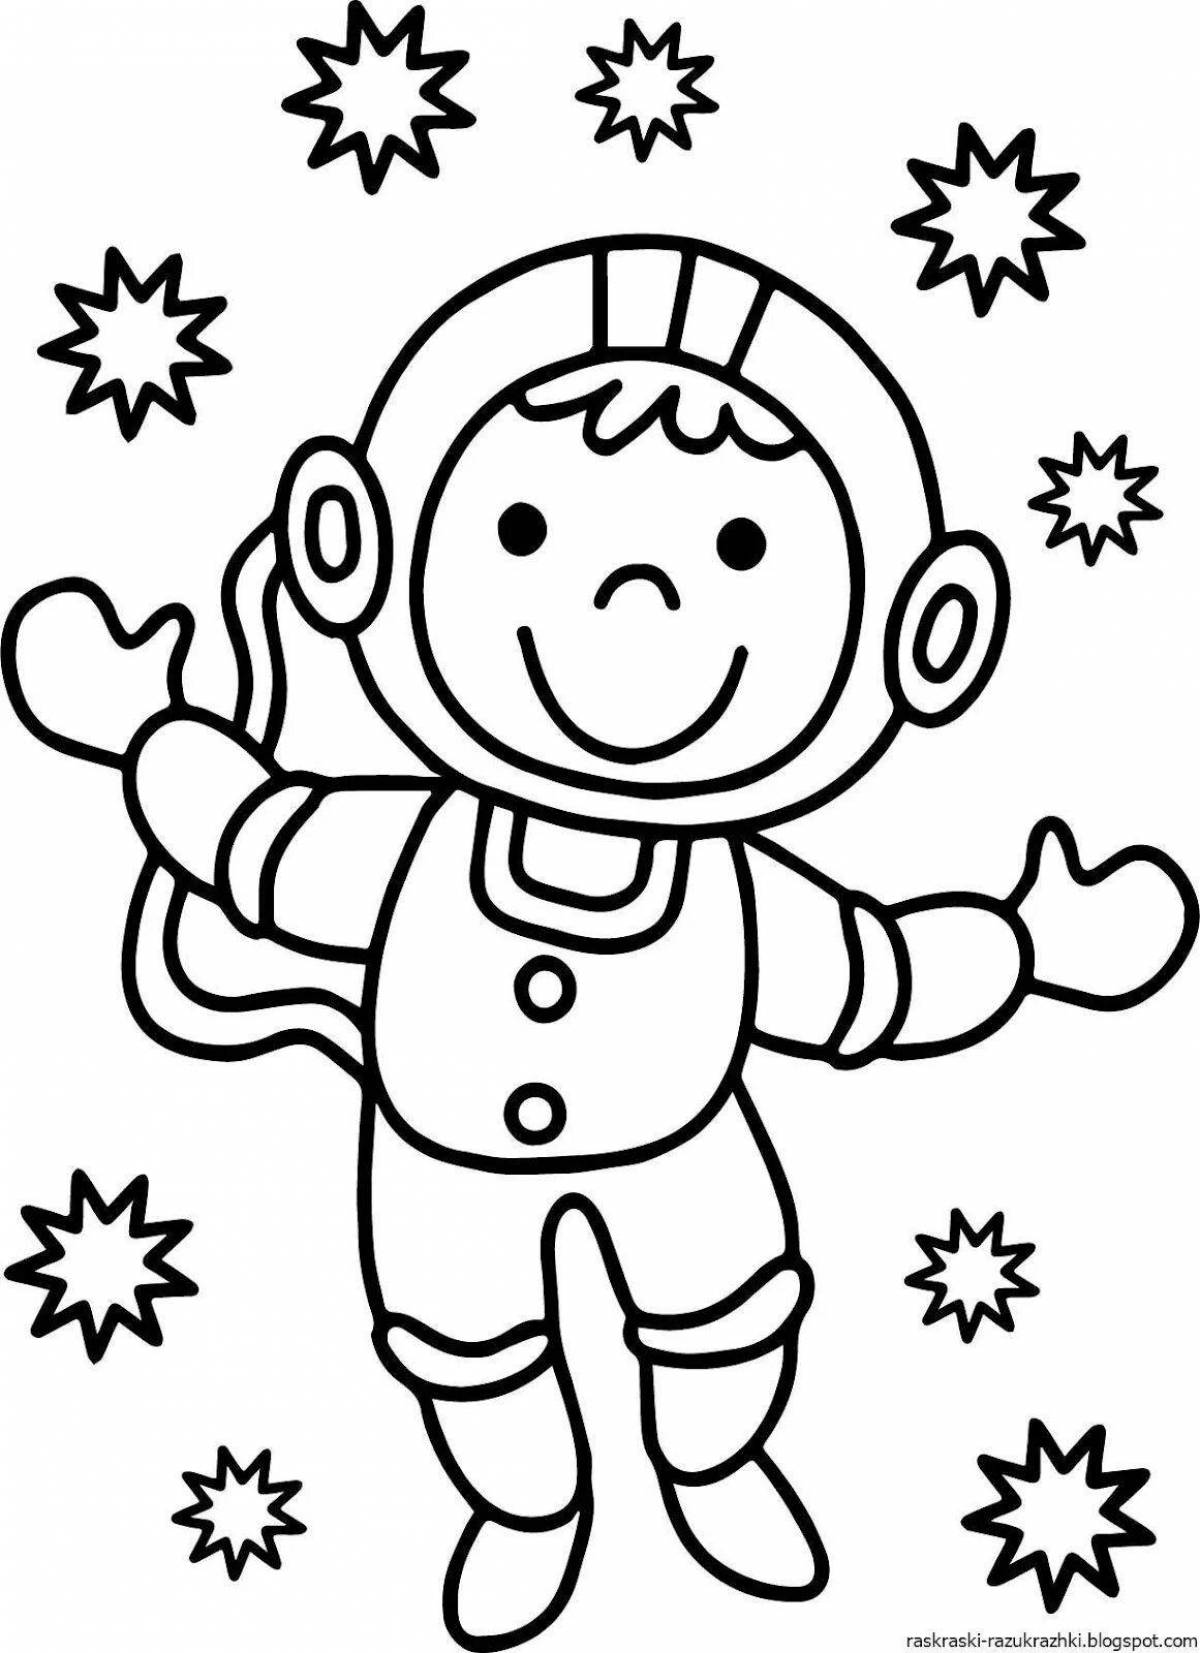 Glorious astronaut coloring pages for kids